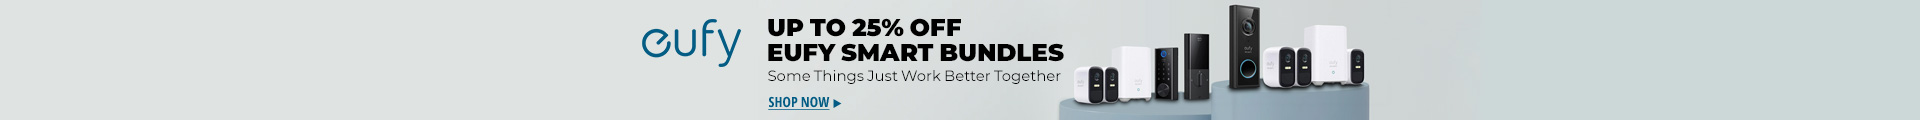 Up to 25% off EUFY Smart Bundles